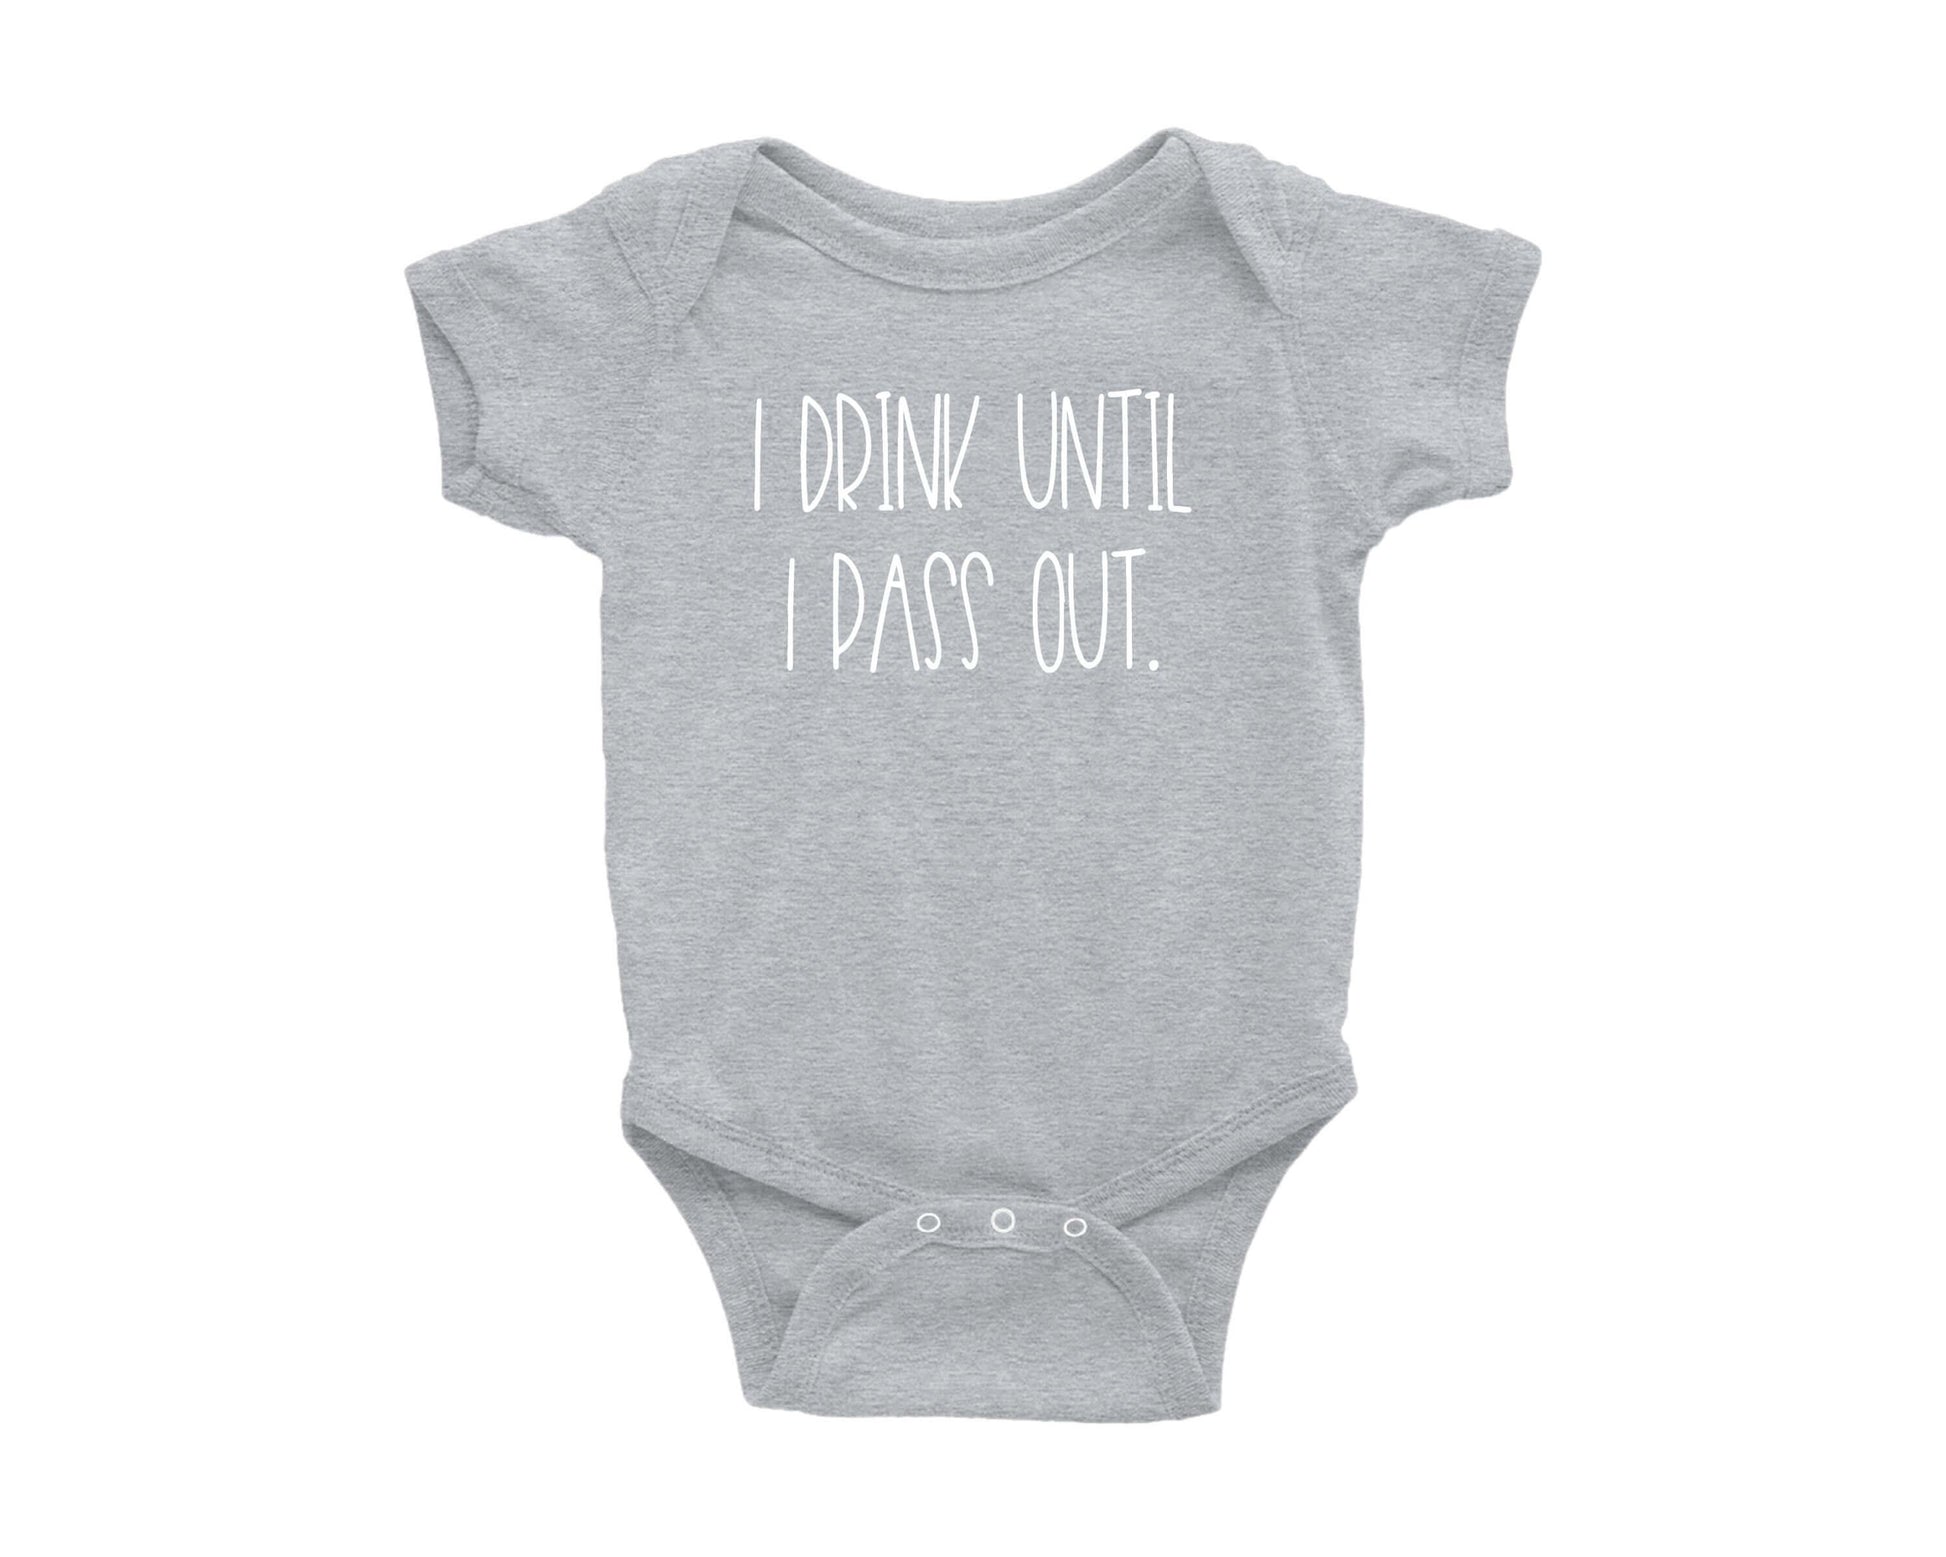 I Drink Until I Pass Out Baby Onesie - Crystal Rose Design Co.